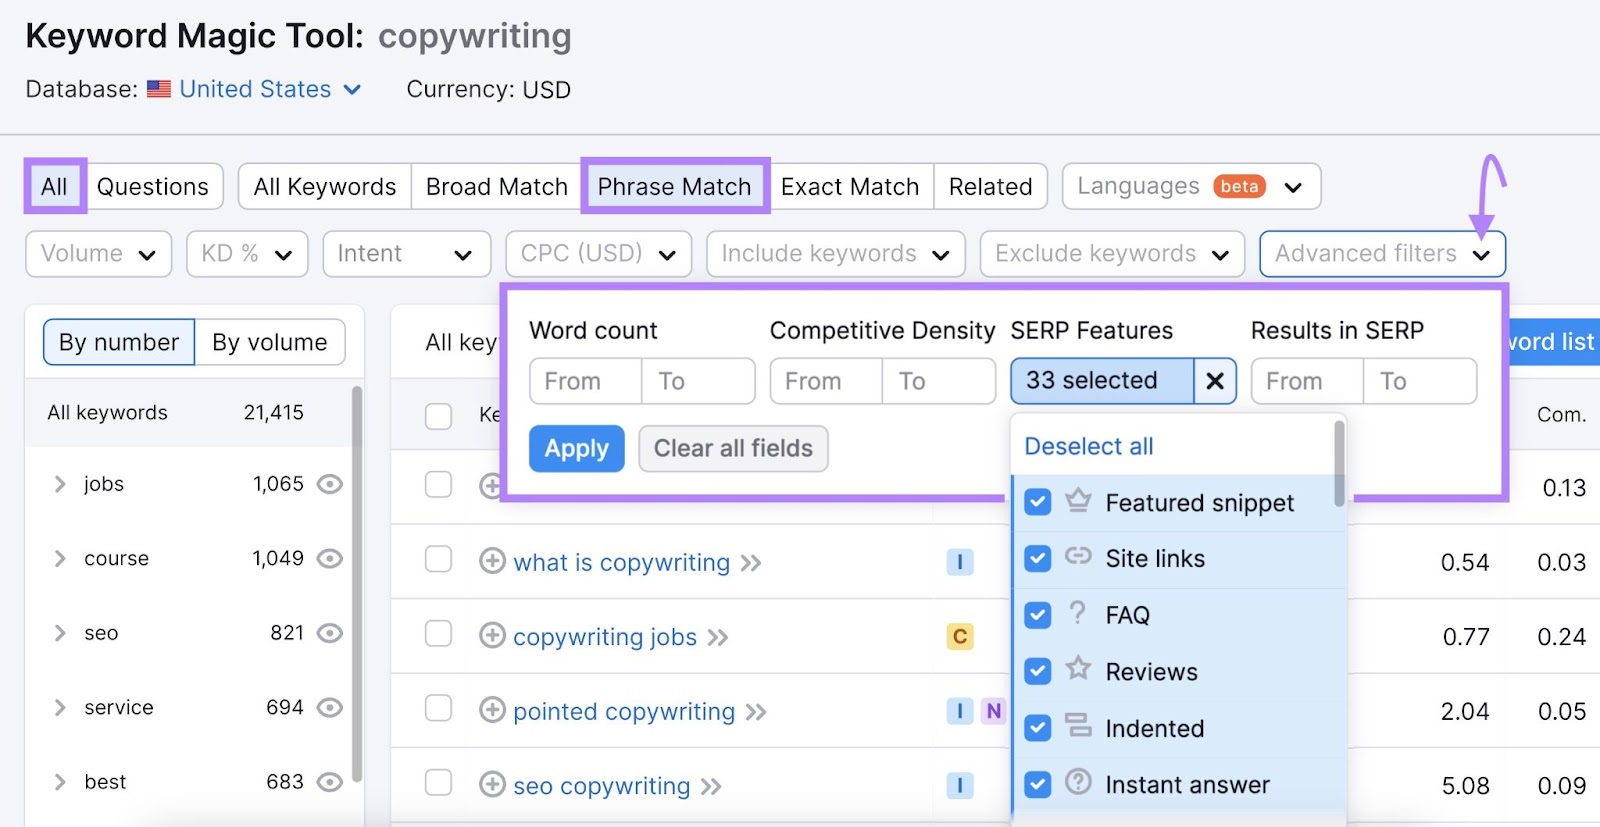 "All," "Phrase Match," and "Advanced filters" pop-up opened successful  Keyword Magic Tool